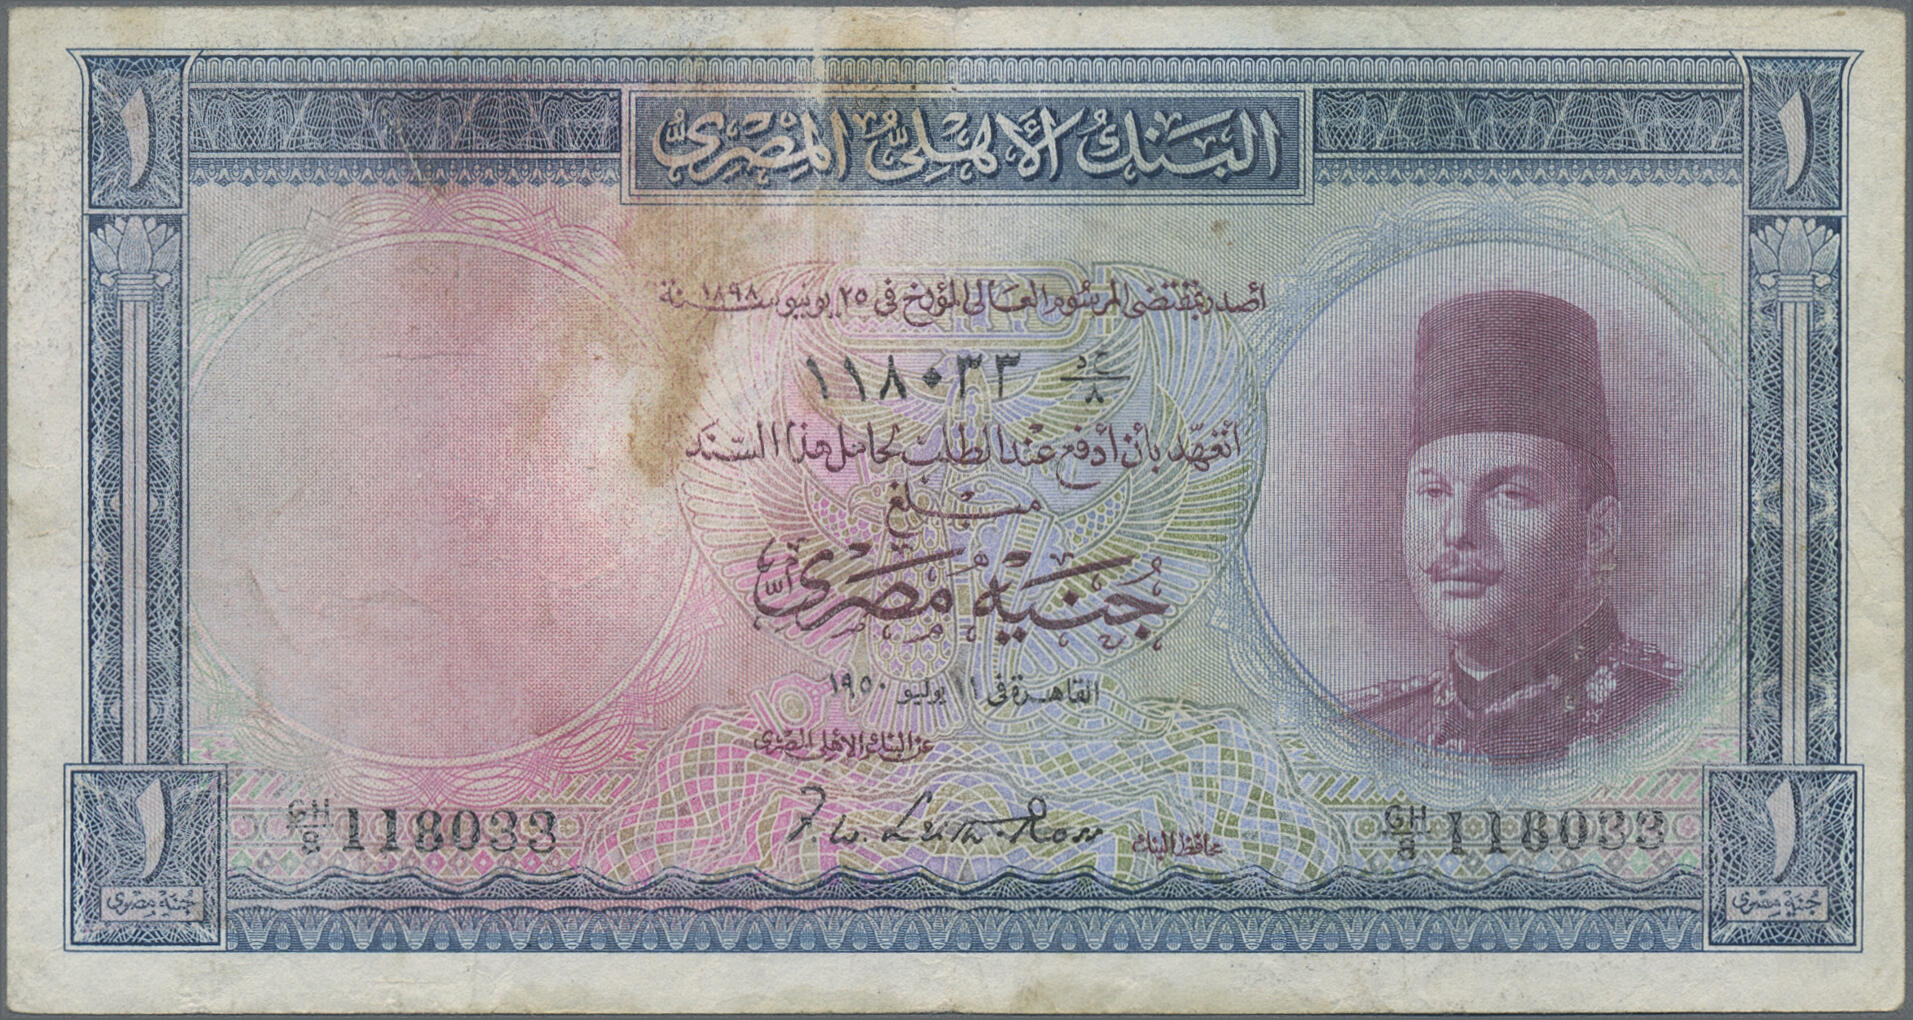 110.550.10: Banknotes – Africa - Egypt